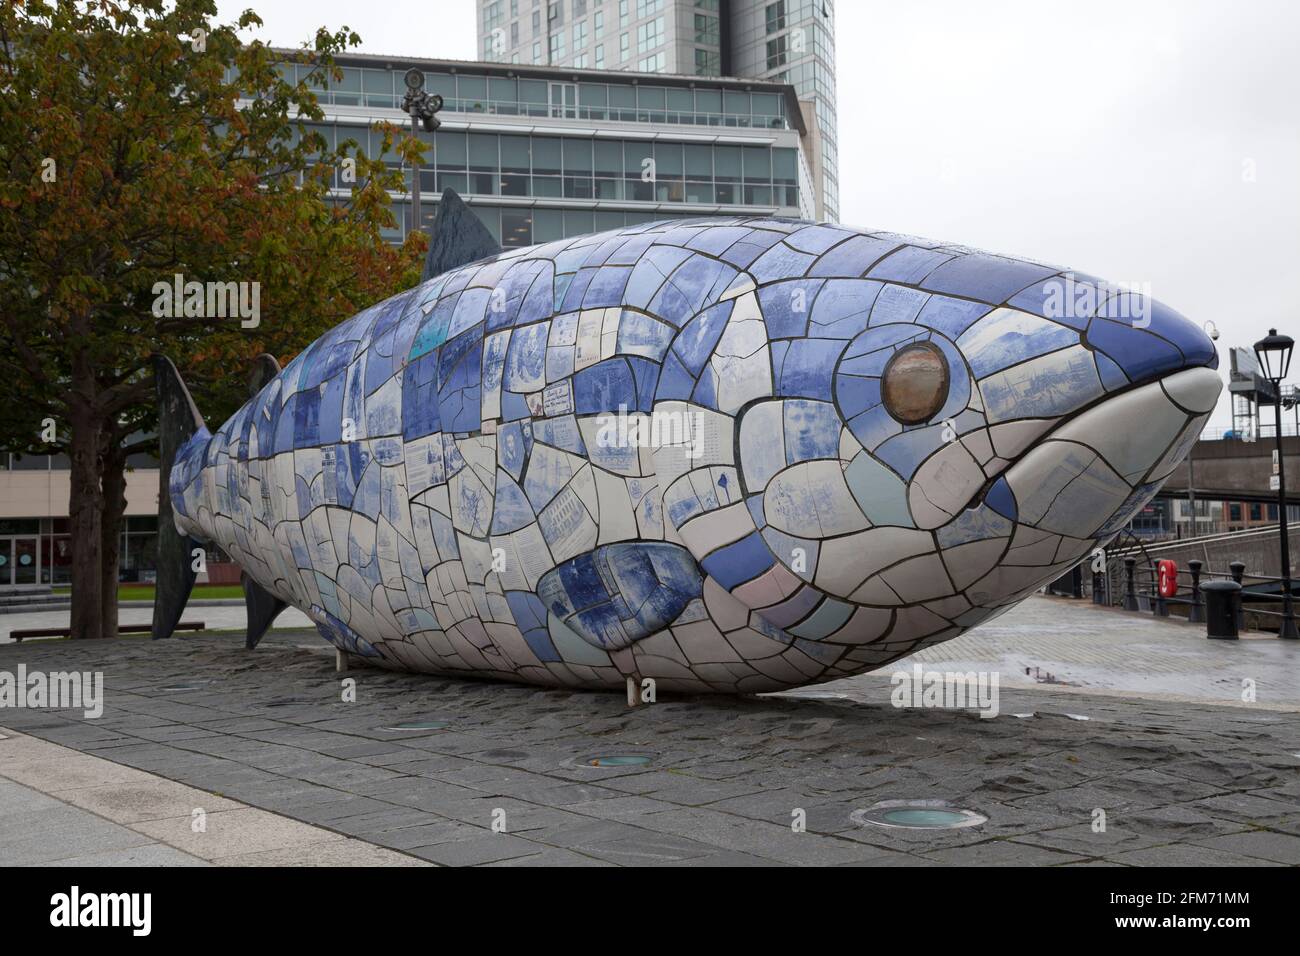 The Big Fish, Belfast, Northern Ireland, a sculpture on the Quayside on the River Lagan, Belfast, Northern Ireland by John Kindness. Stock Photo